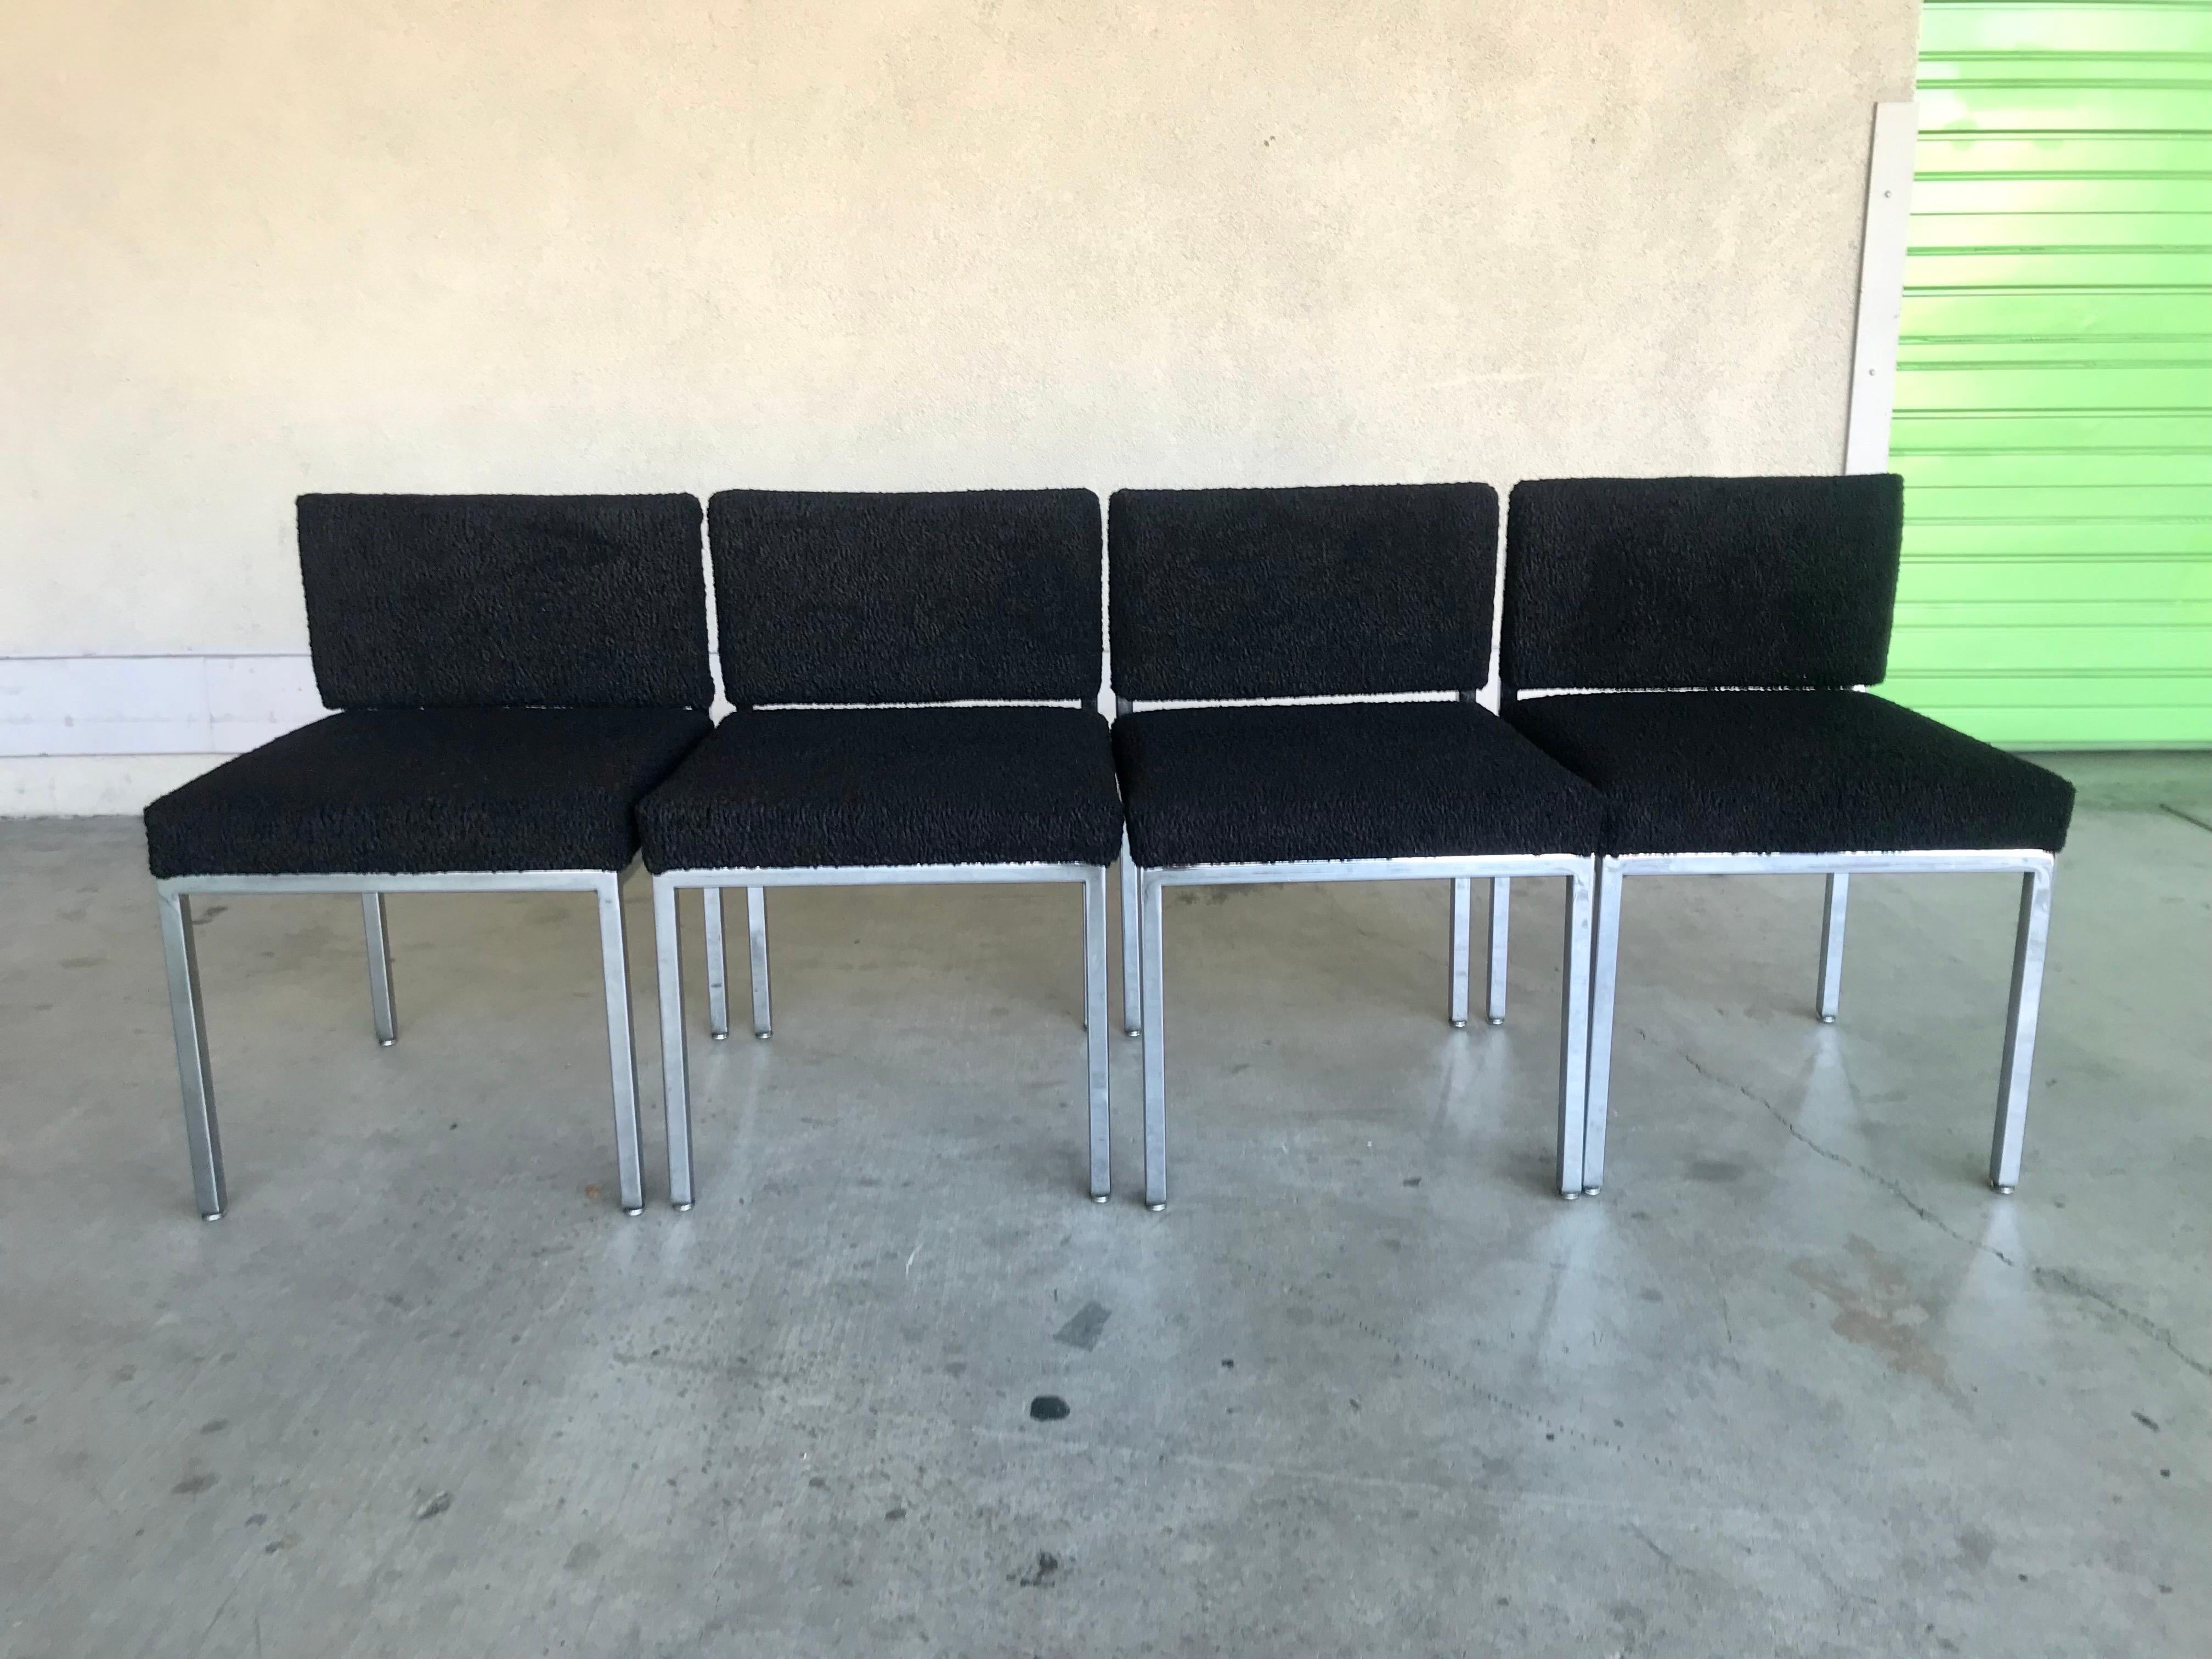 Simple modernist design. 
Great for any occasion: dining, gallery, office, breakfast nook et cetra..
Polished steel with new black boucle upholstery. 
The backrest has a nice feature. 
It contours to the sitters back pivoting back and forth for